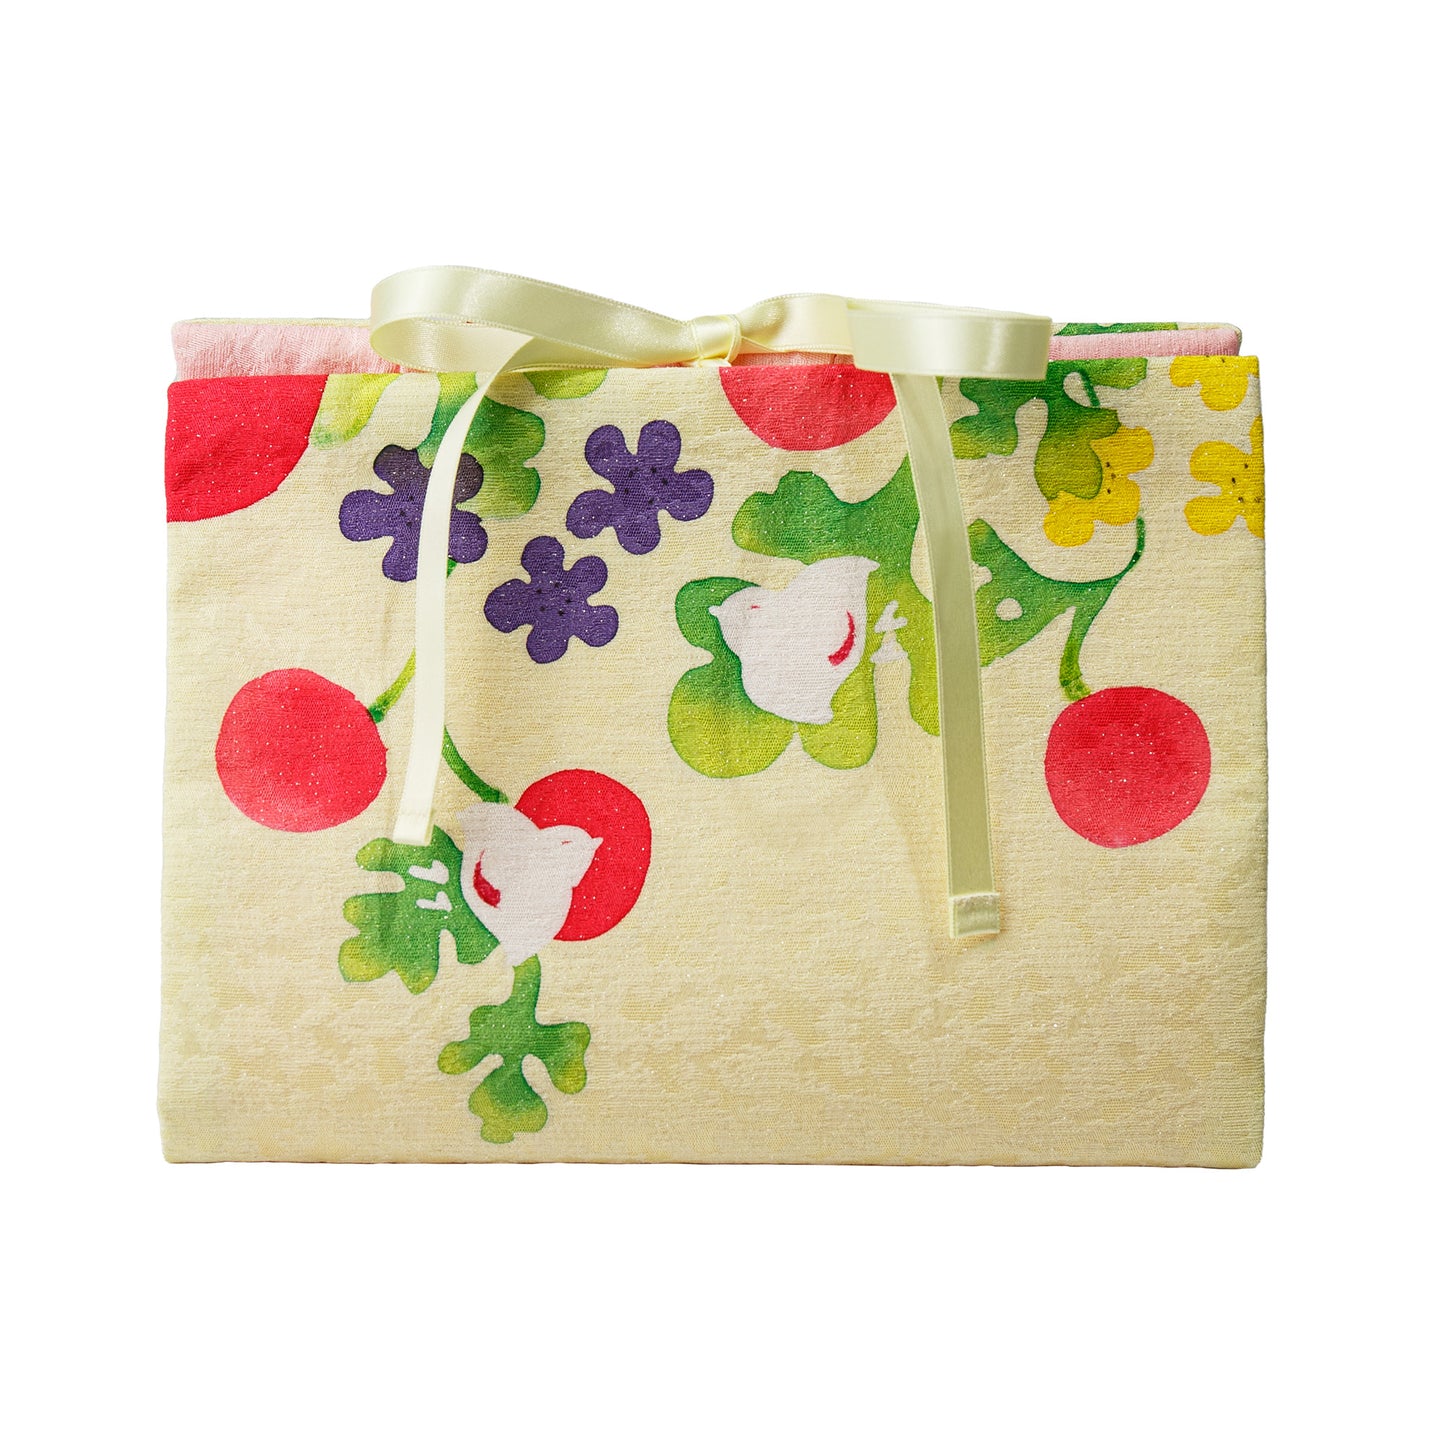 Primary image of Small Yellow Lingerie Pouch